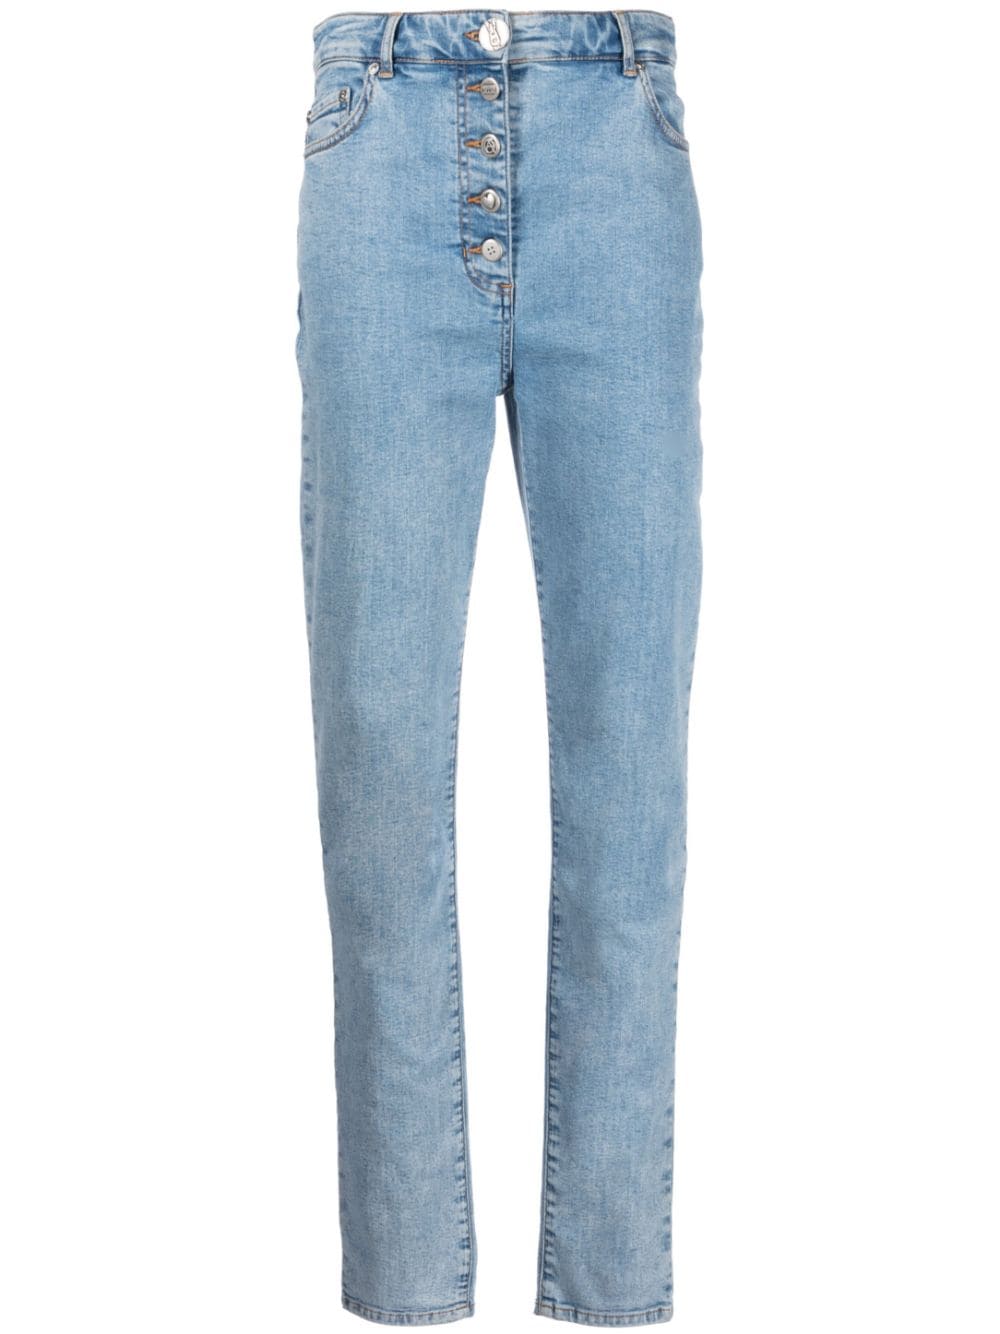 MOSCHINO JEANS high-rise slim-cut jeans - Blue von MOSCHINO JEANS